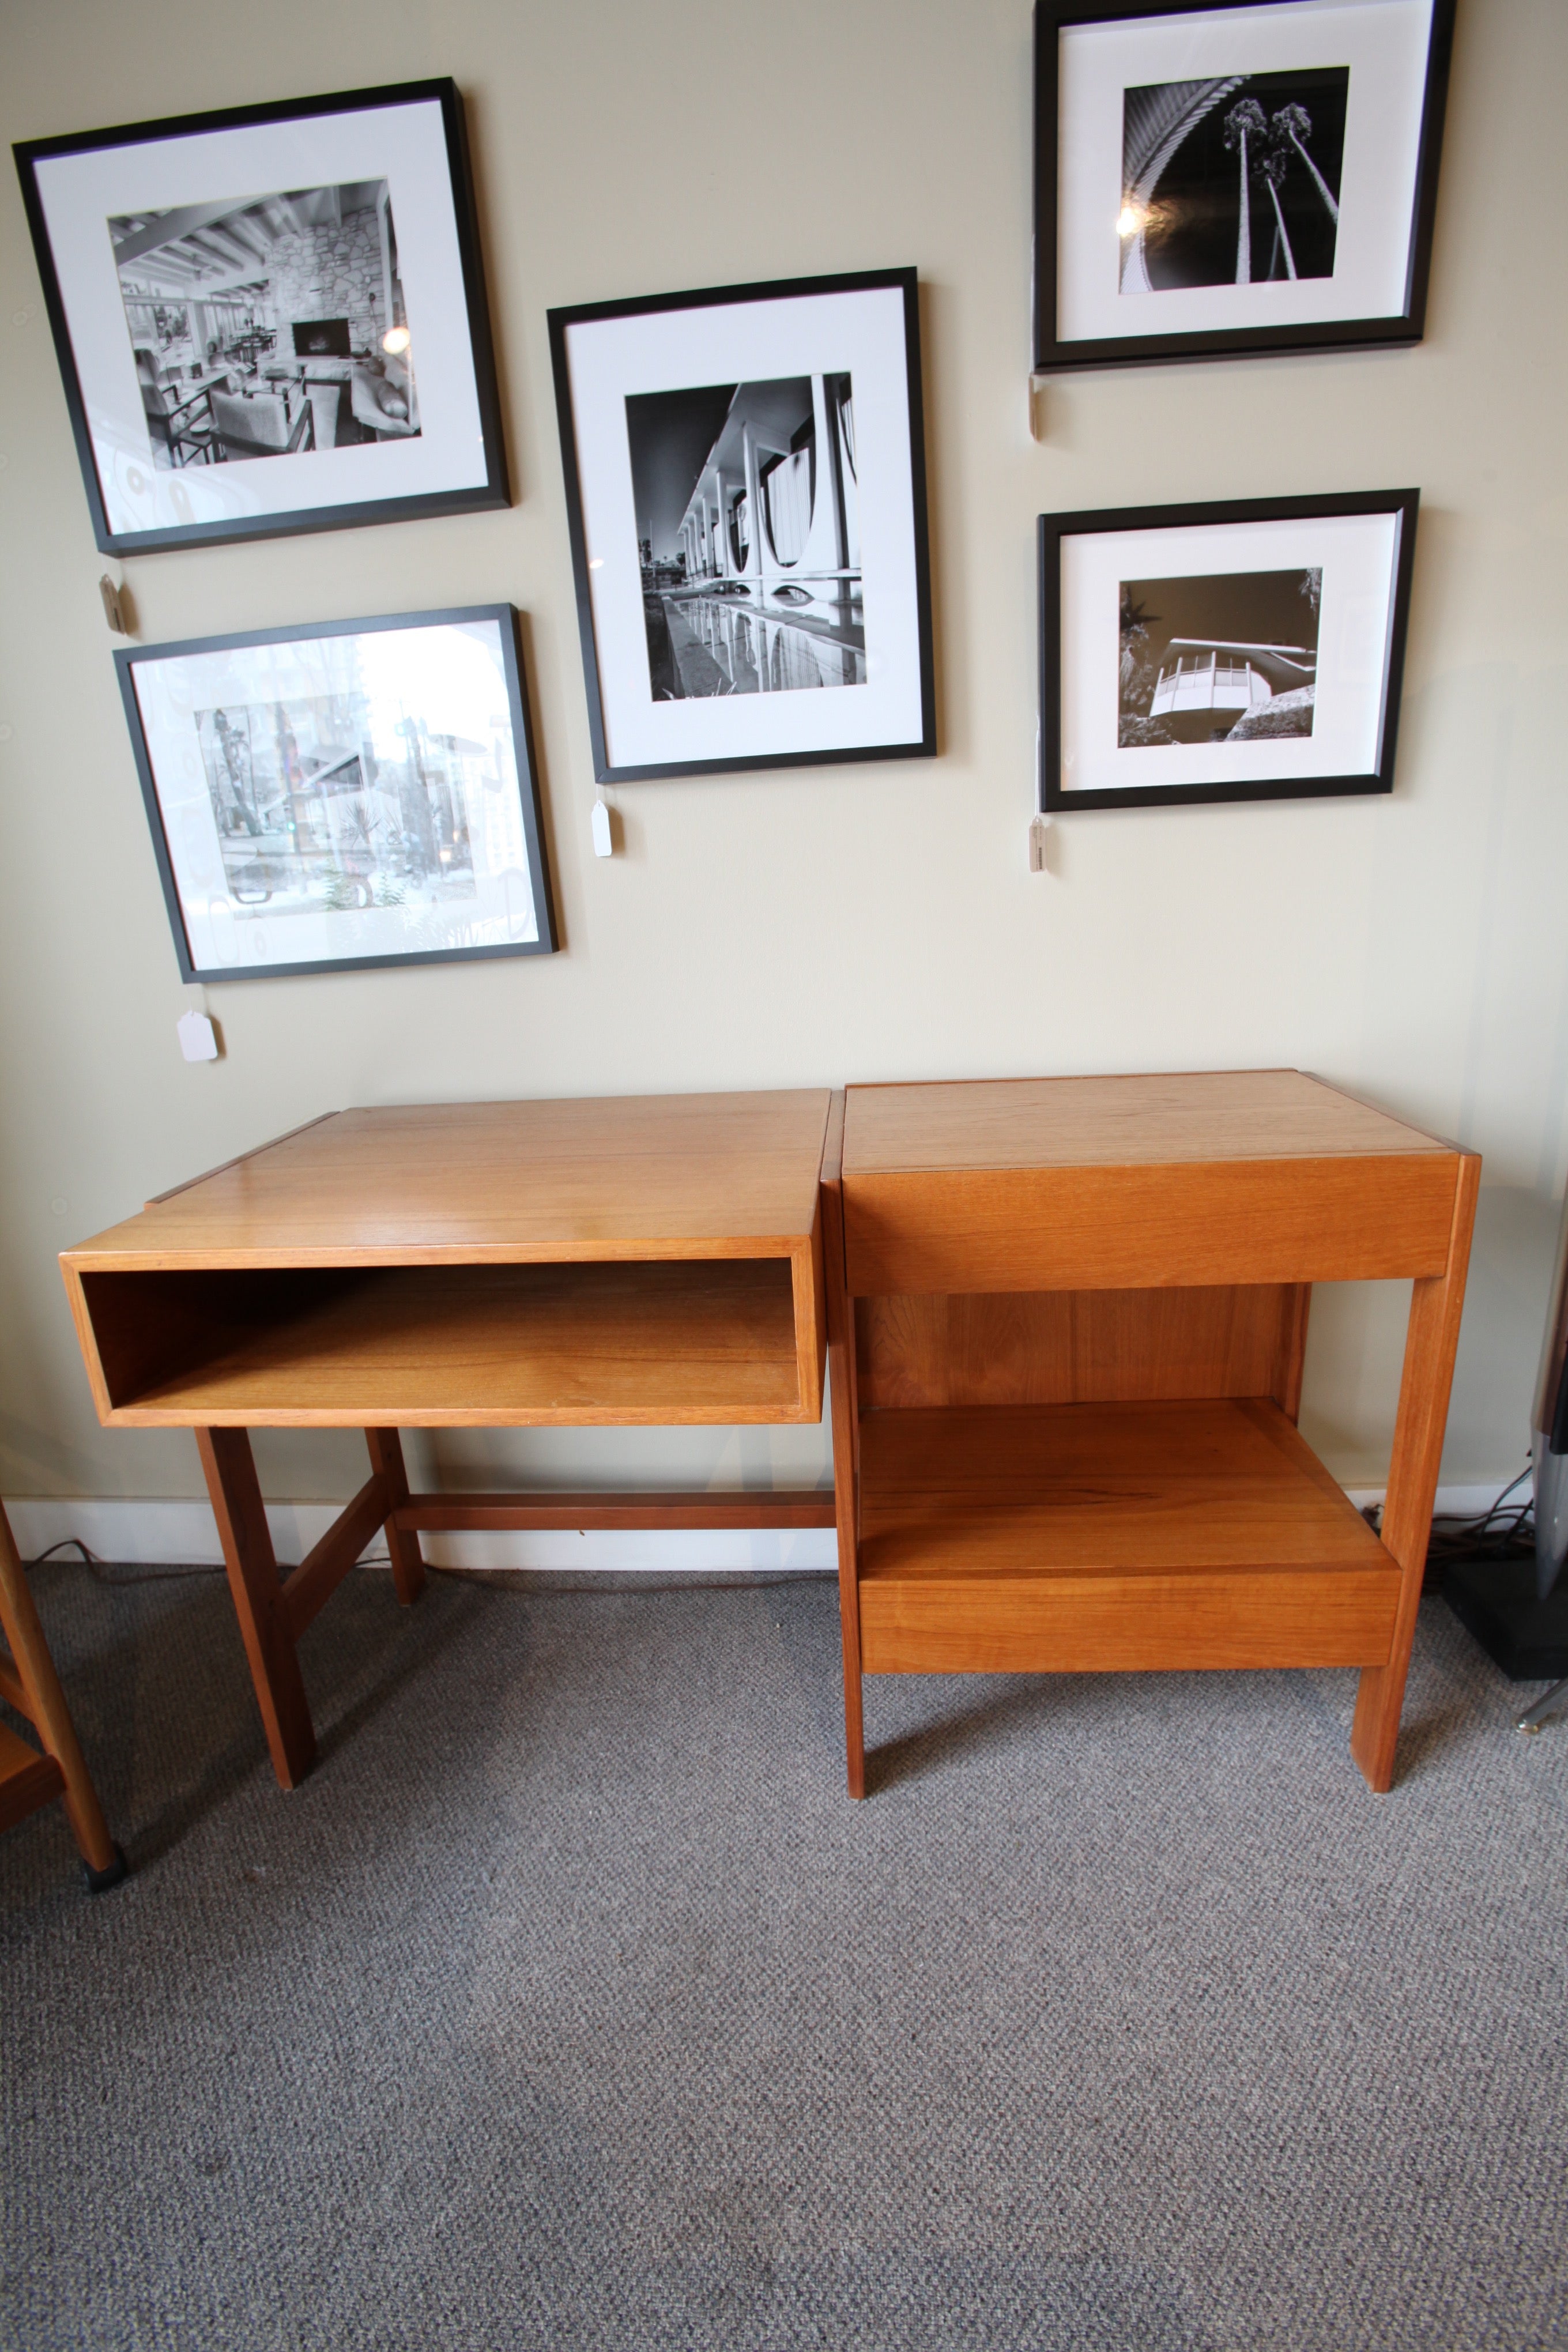 Teak Desk or Stereo Stand w/2 drawers (52"W x 23"D x 30"H)